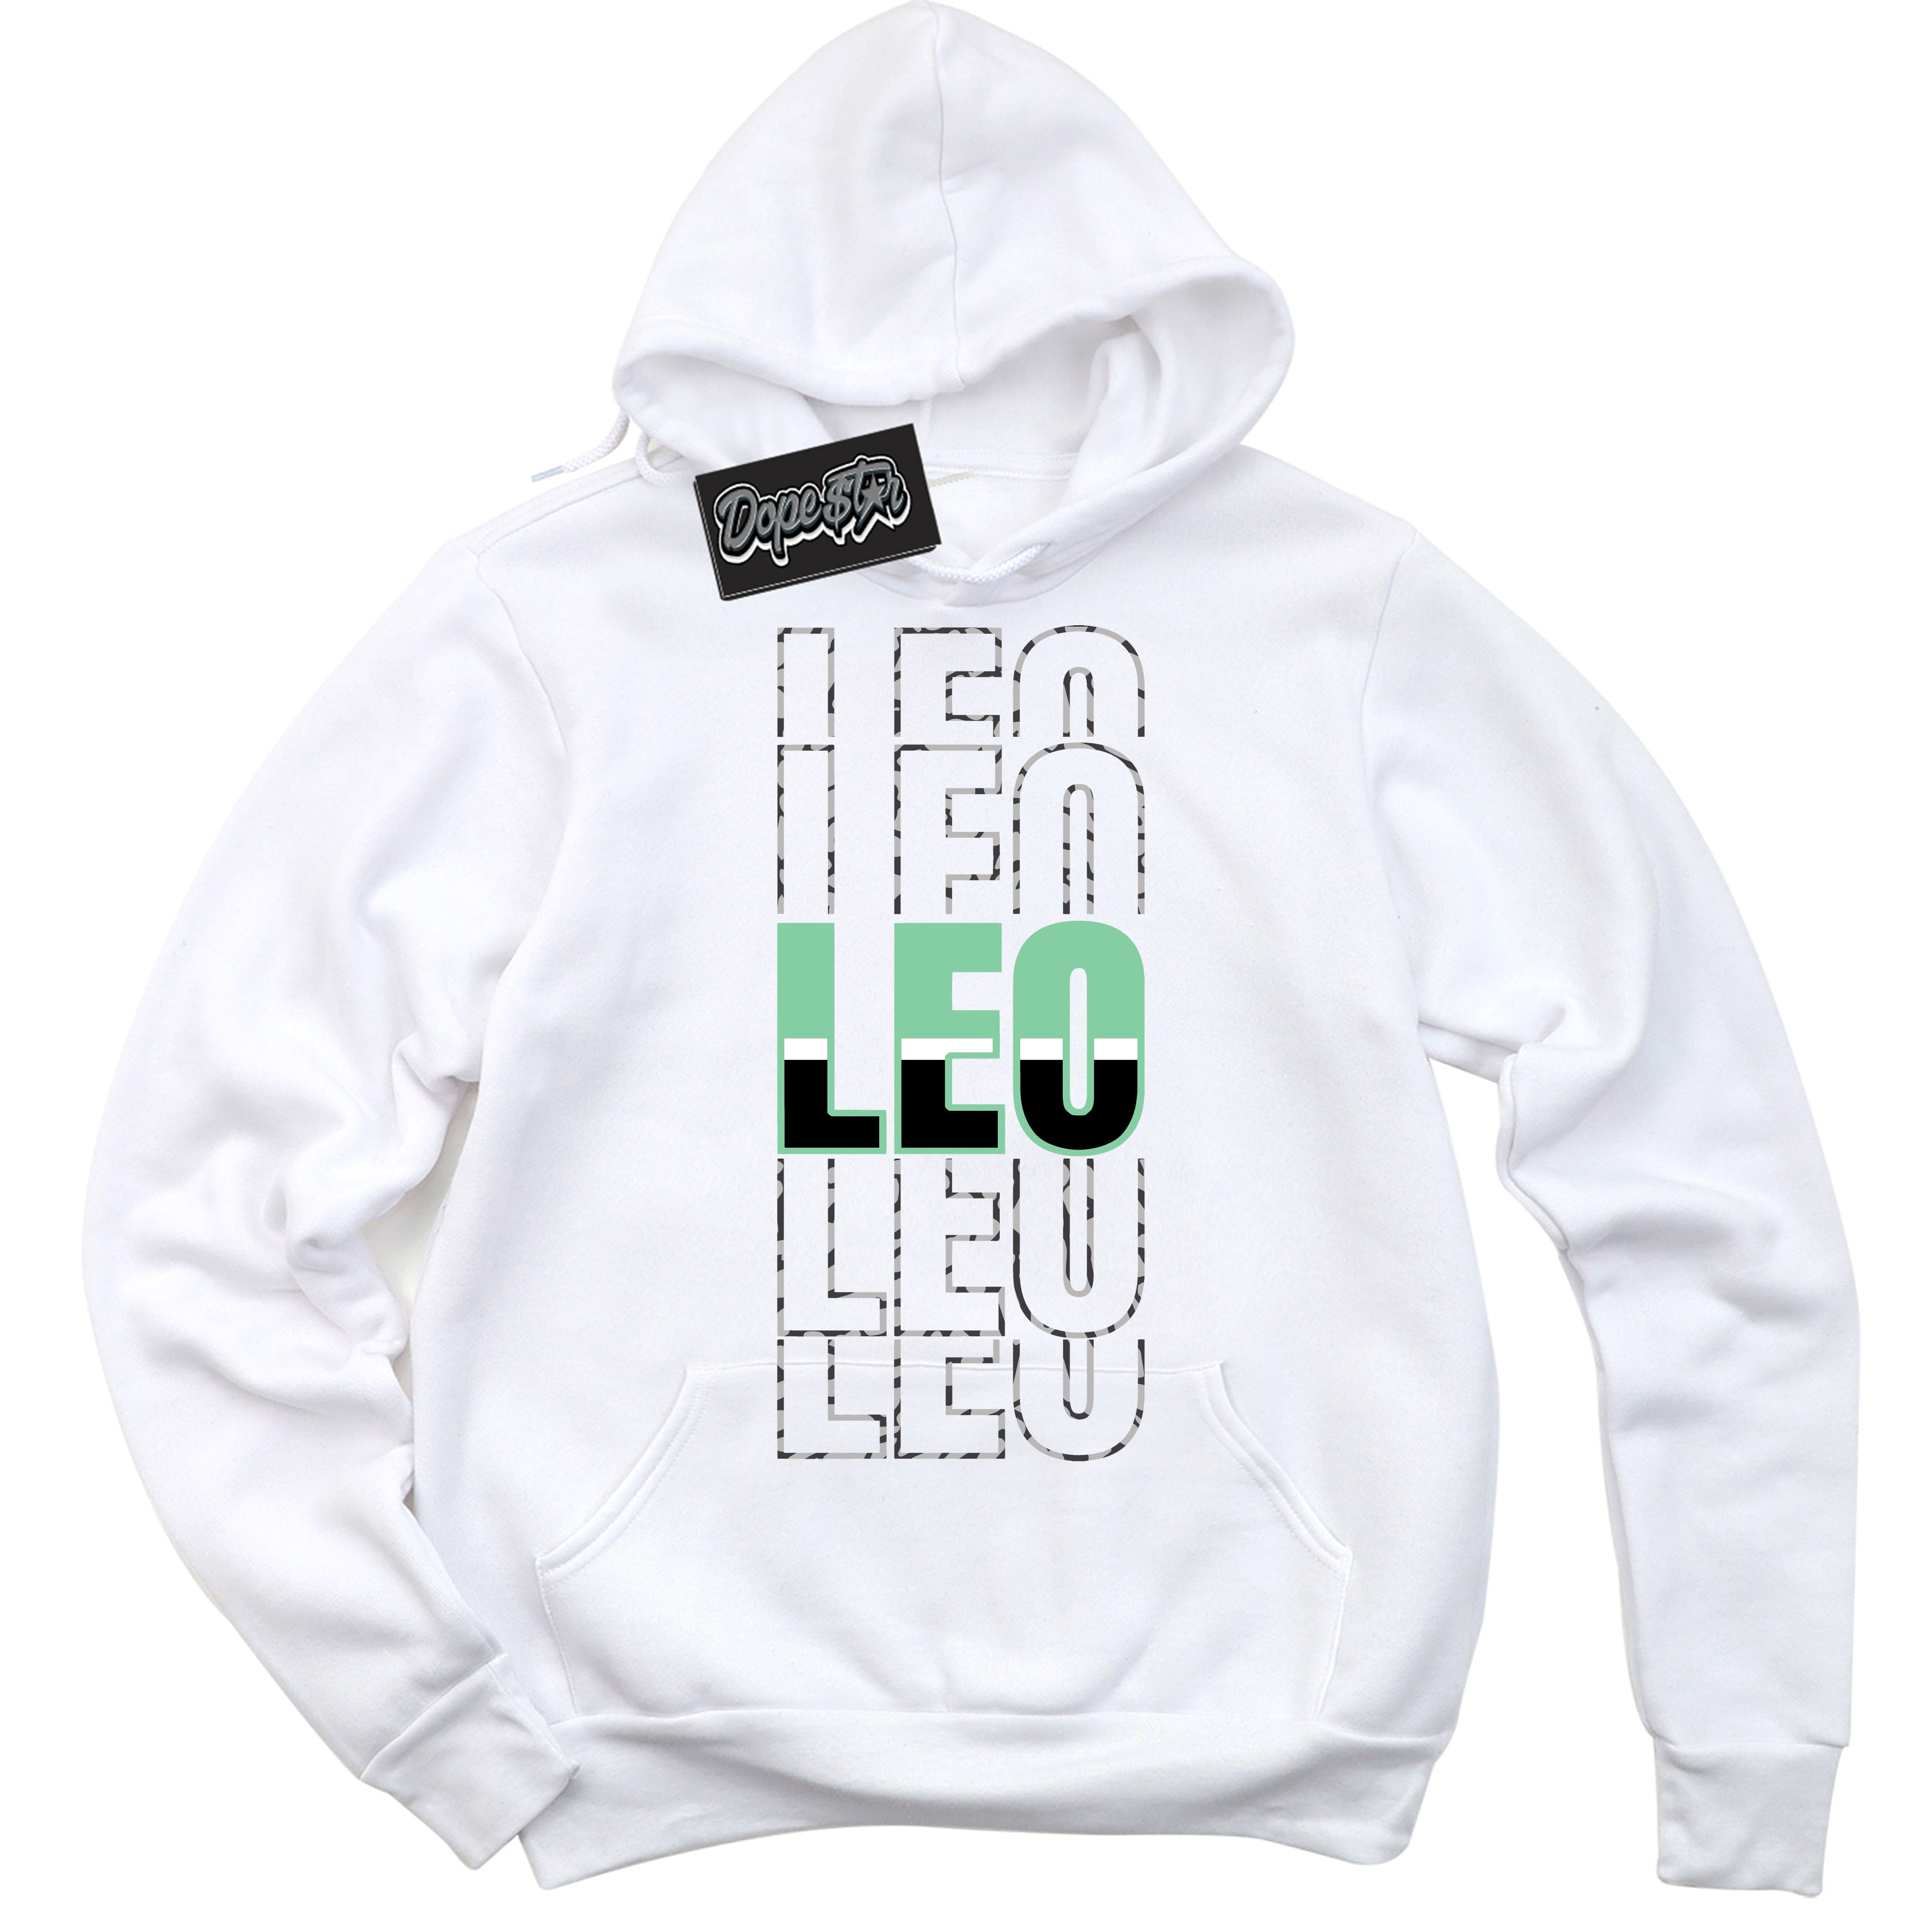 Cool White Graphic DopeStar Hoodie with “ Leo “ print, that perfectly matches Green Glow 3s sneakers